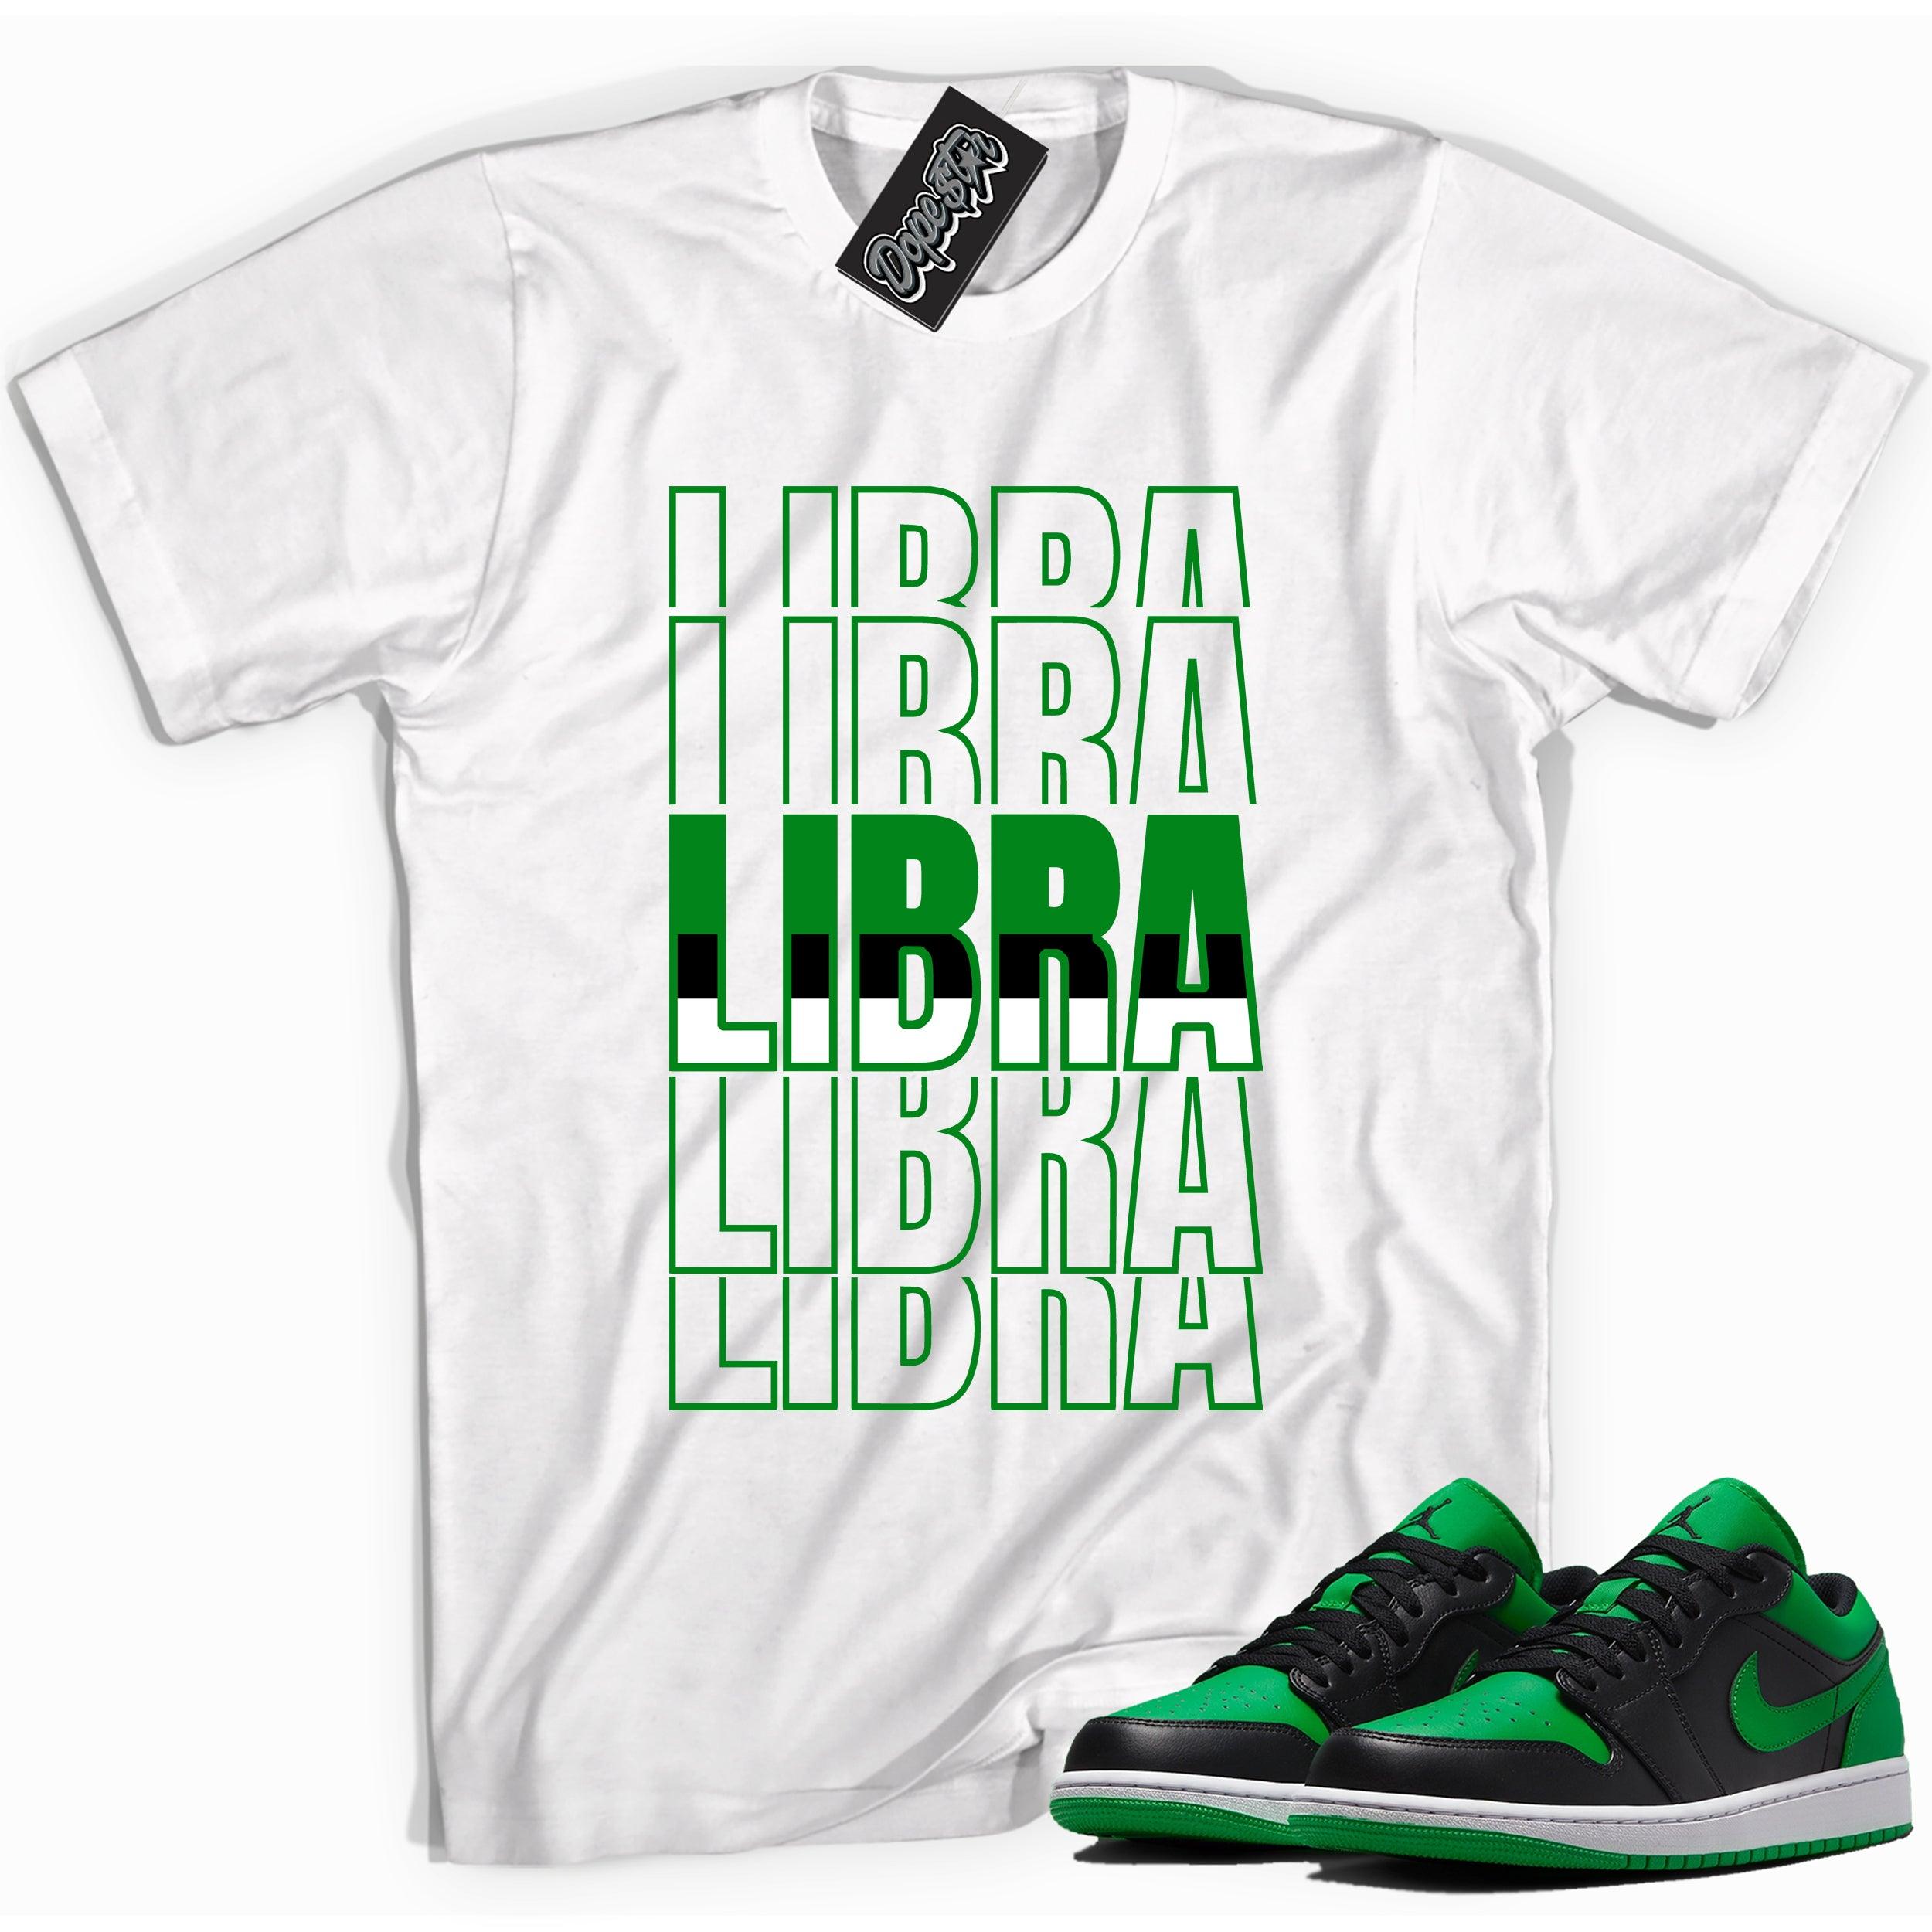 Cool white graphic tee with 'libra' print, that perfectly matches Air Jordan 1 Low Lucky Green sneakers